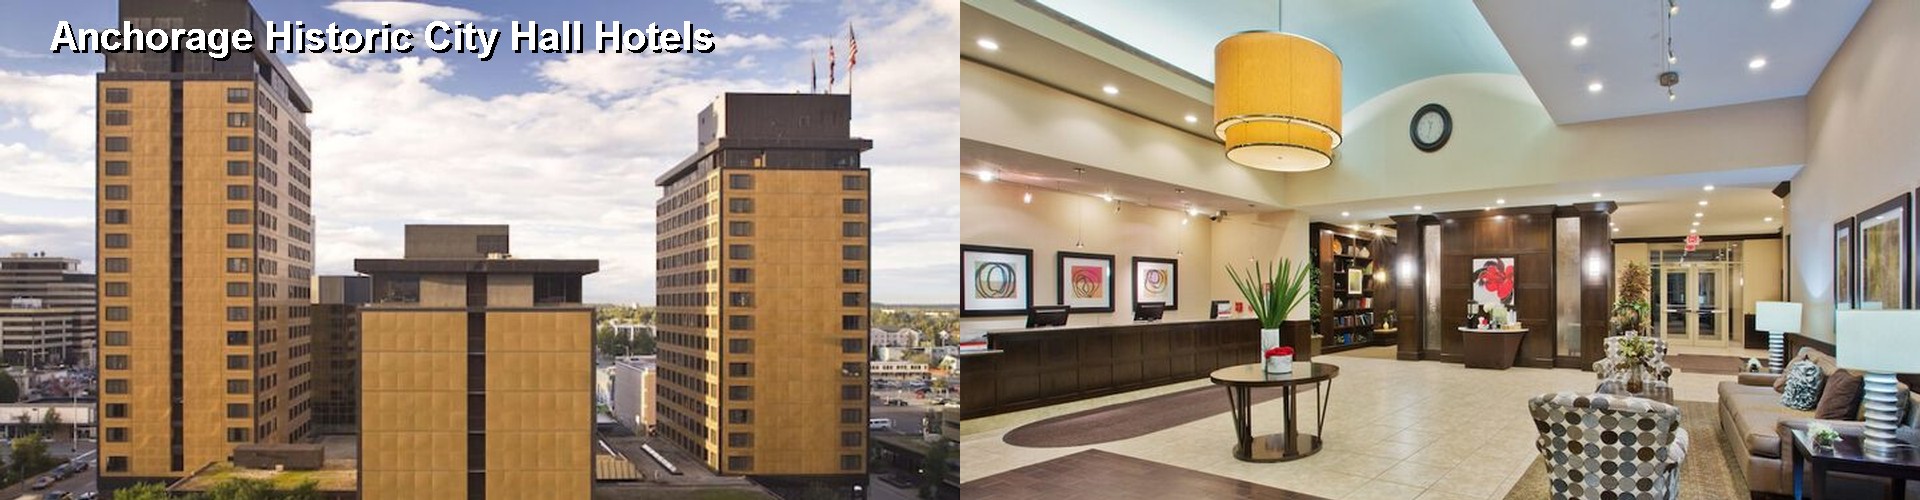 5 Best Hotels near Anchorage Historic City Hall